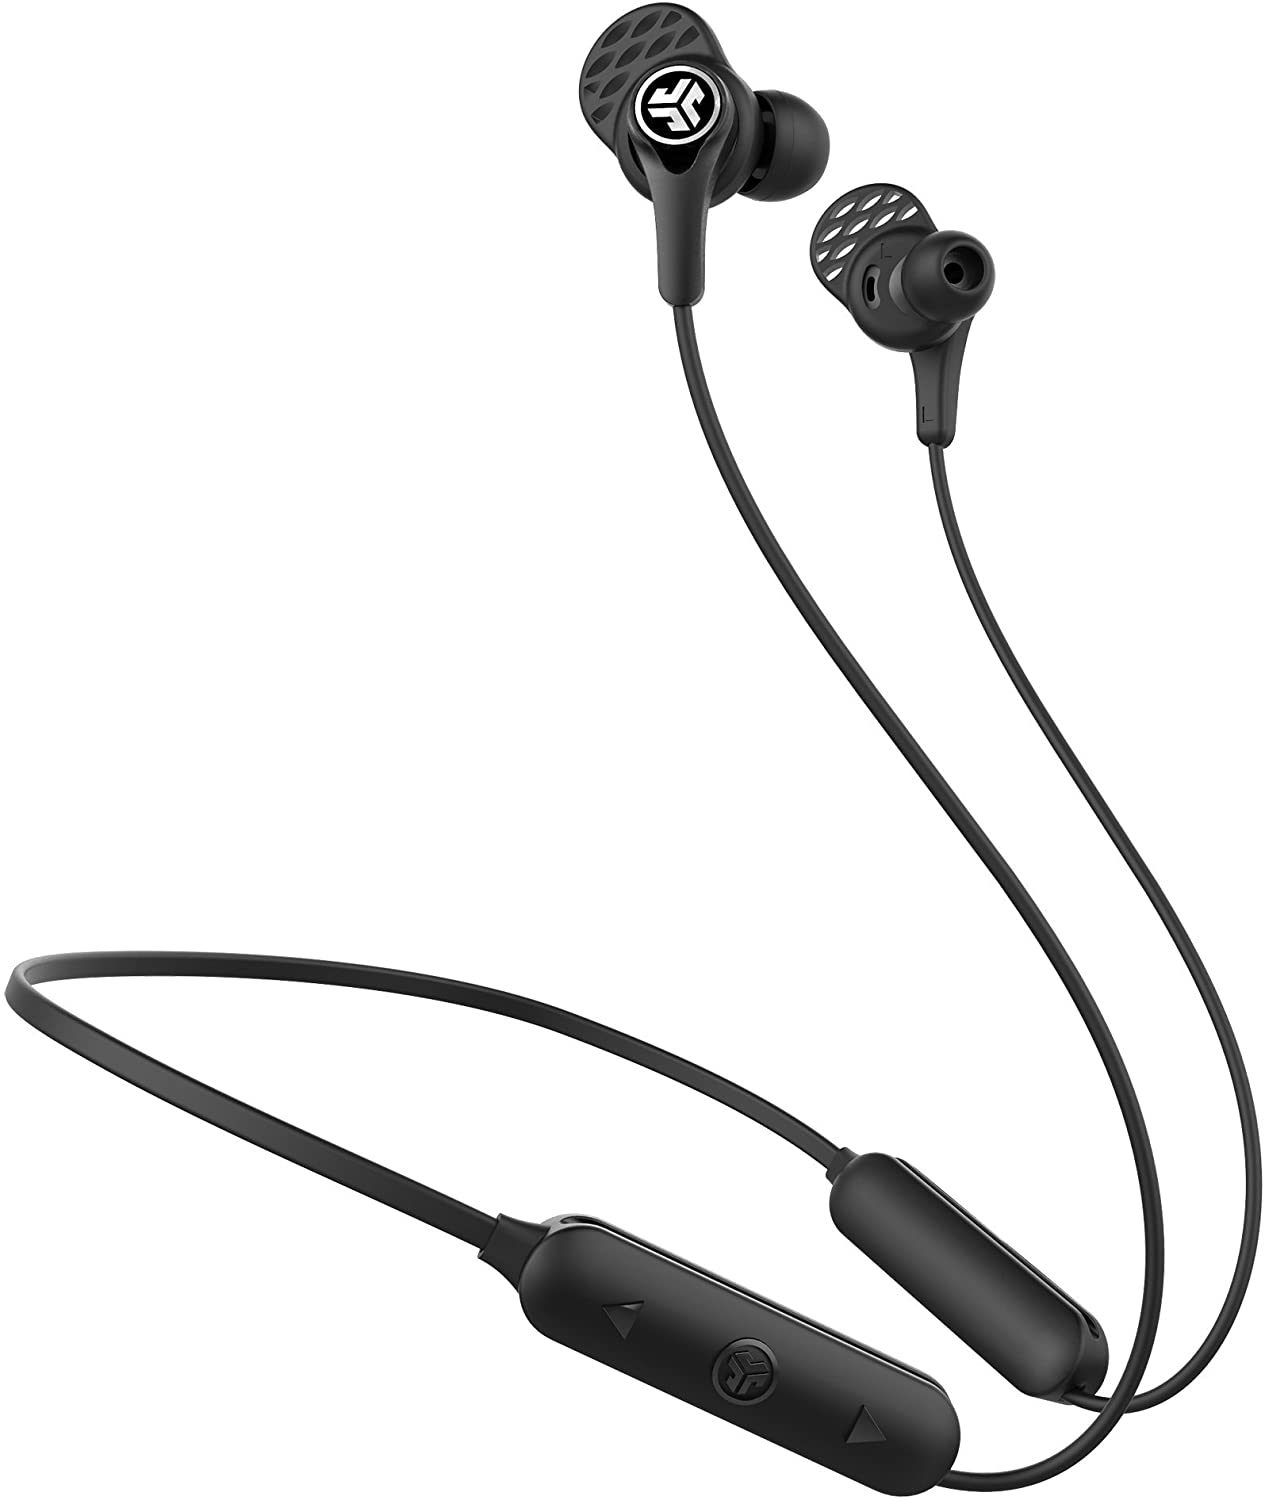 JLab Epic Executive Wireless Active Noise Canceling Earbuds | Bluetooth 4.1 | 11-Hour Battery Life | Universal Music Control | Bluetooth Headphones, Travel Case Included | Black